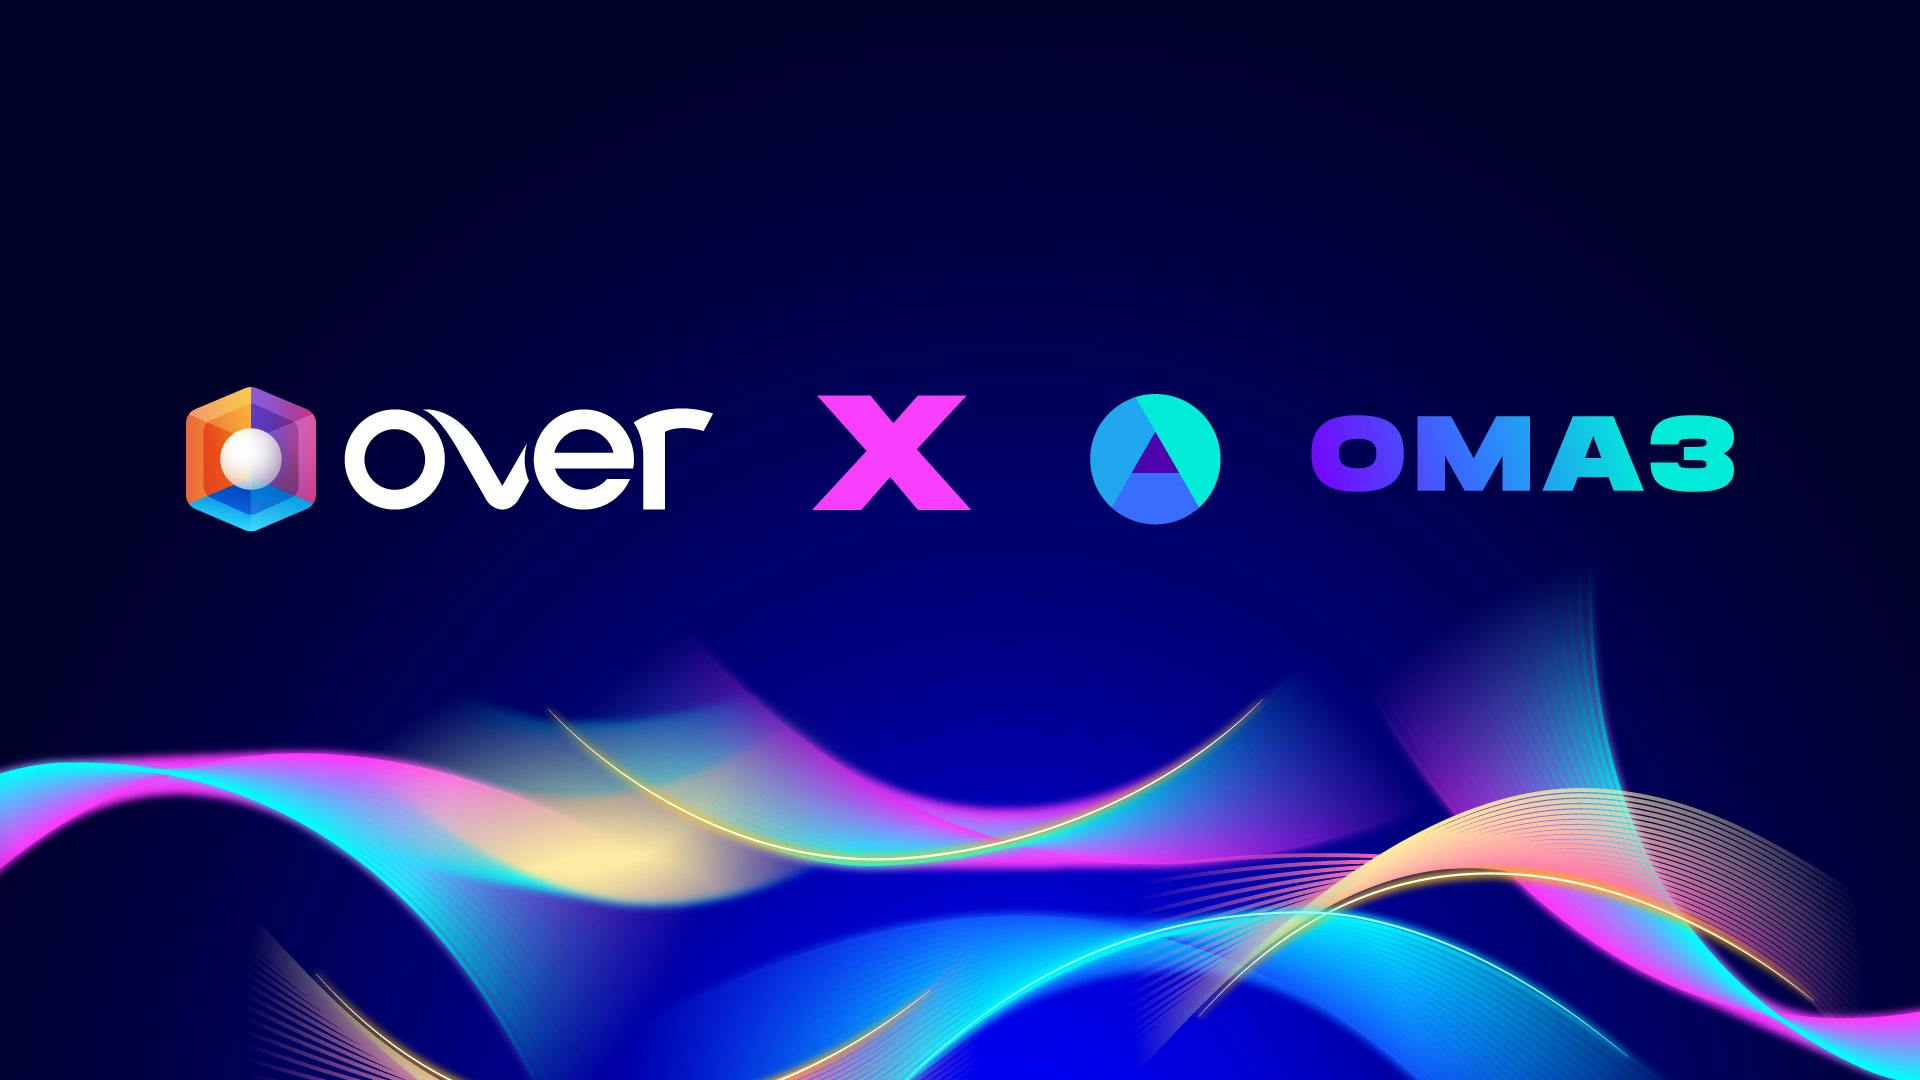 OVER joins OMA3™